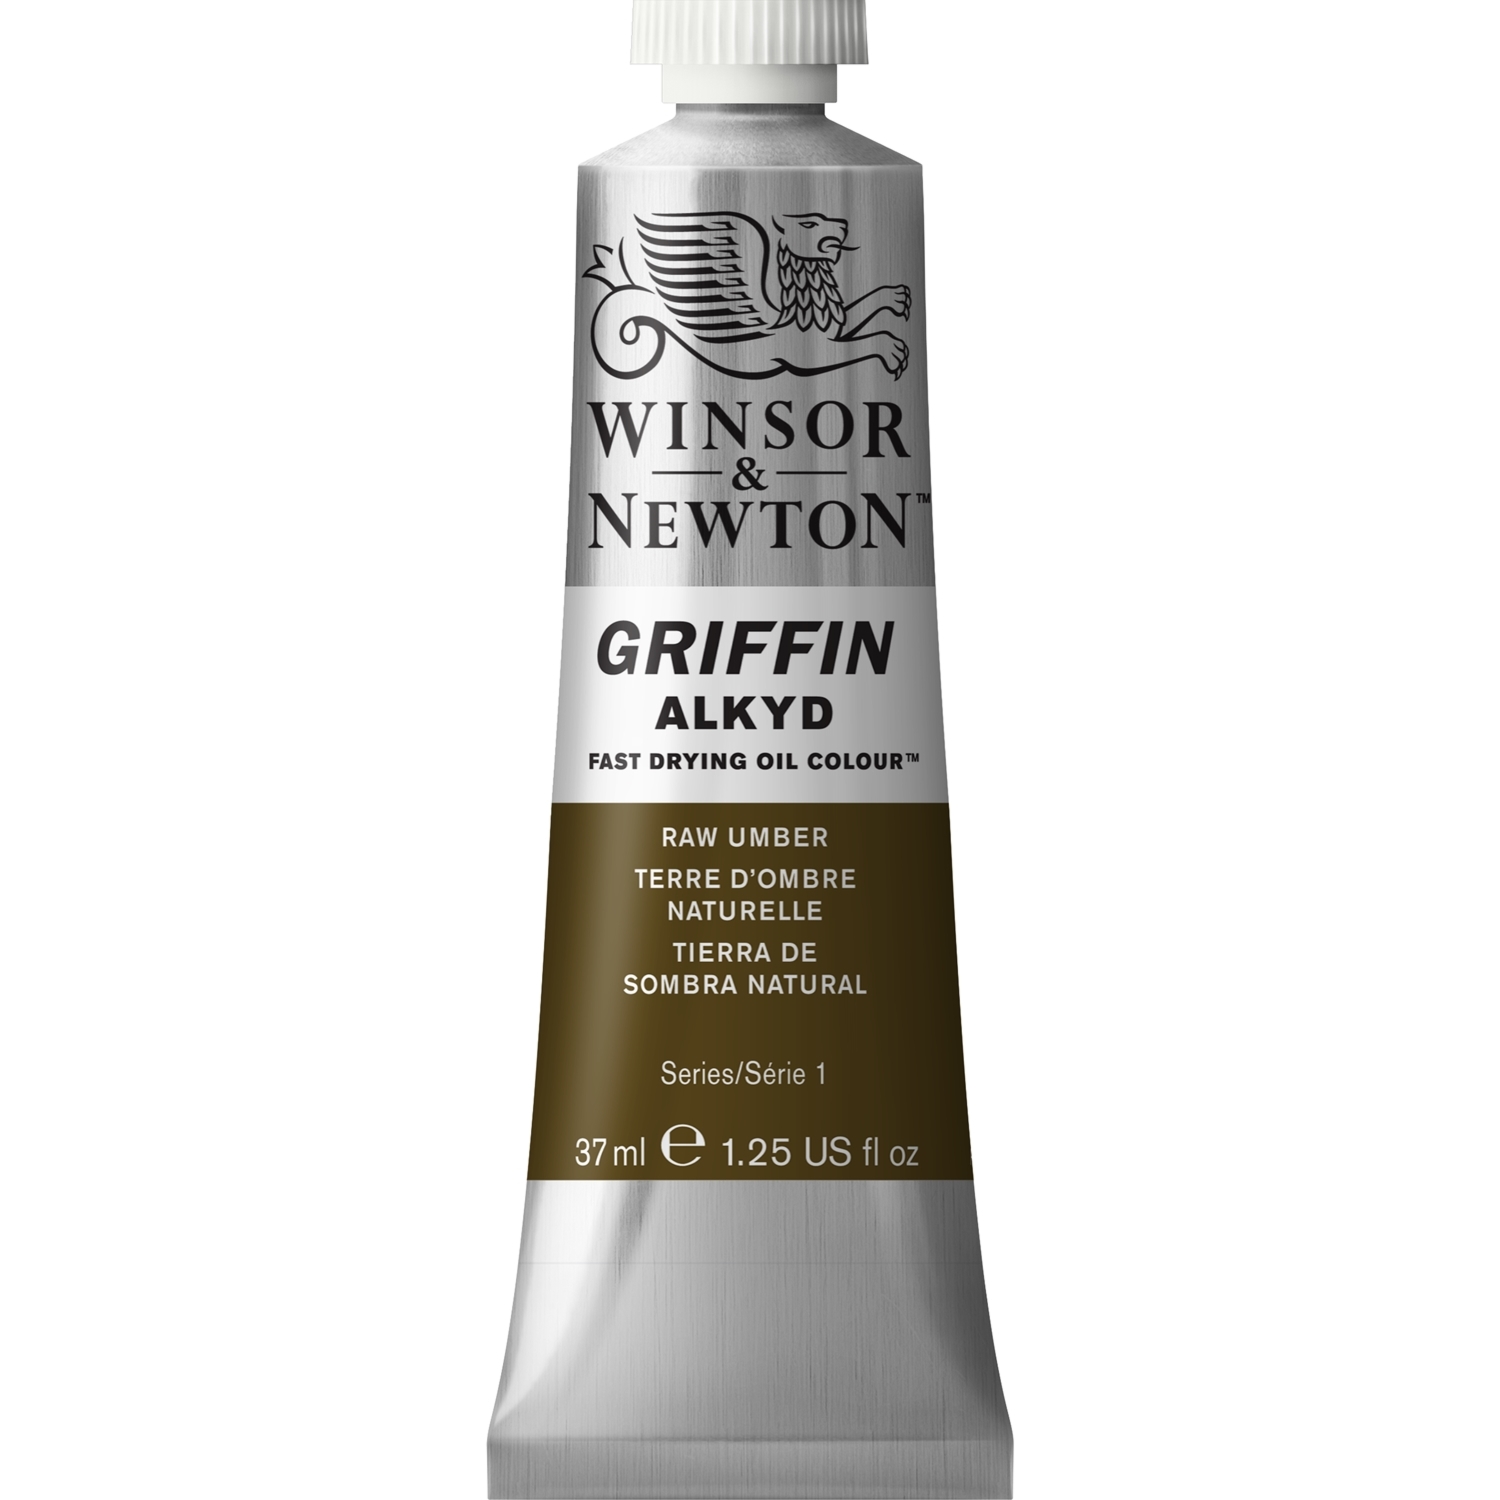 Winsor and Newton Griffin Alkyd Oil Colour - Raw Umber Image 1